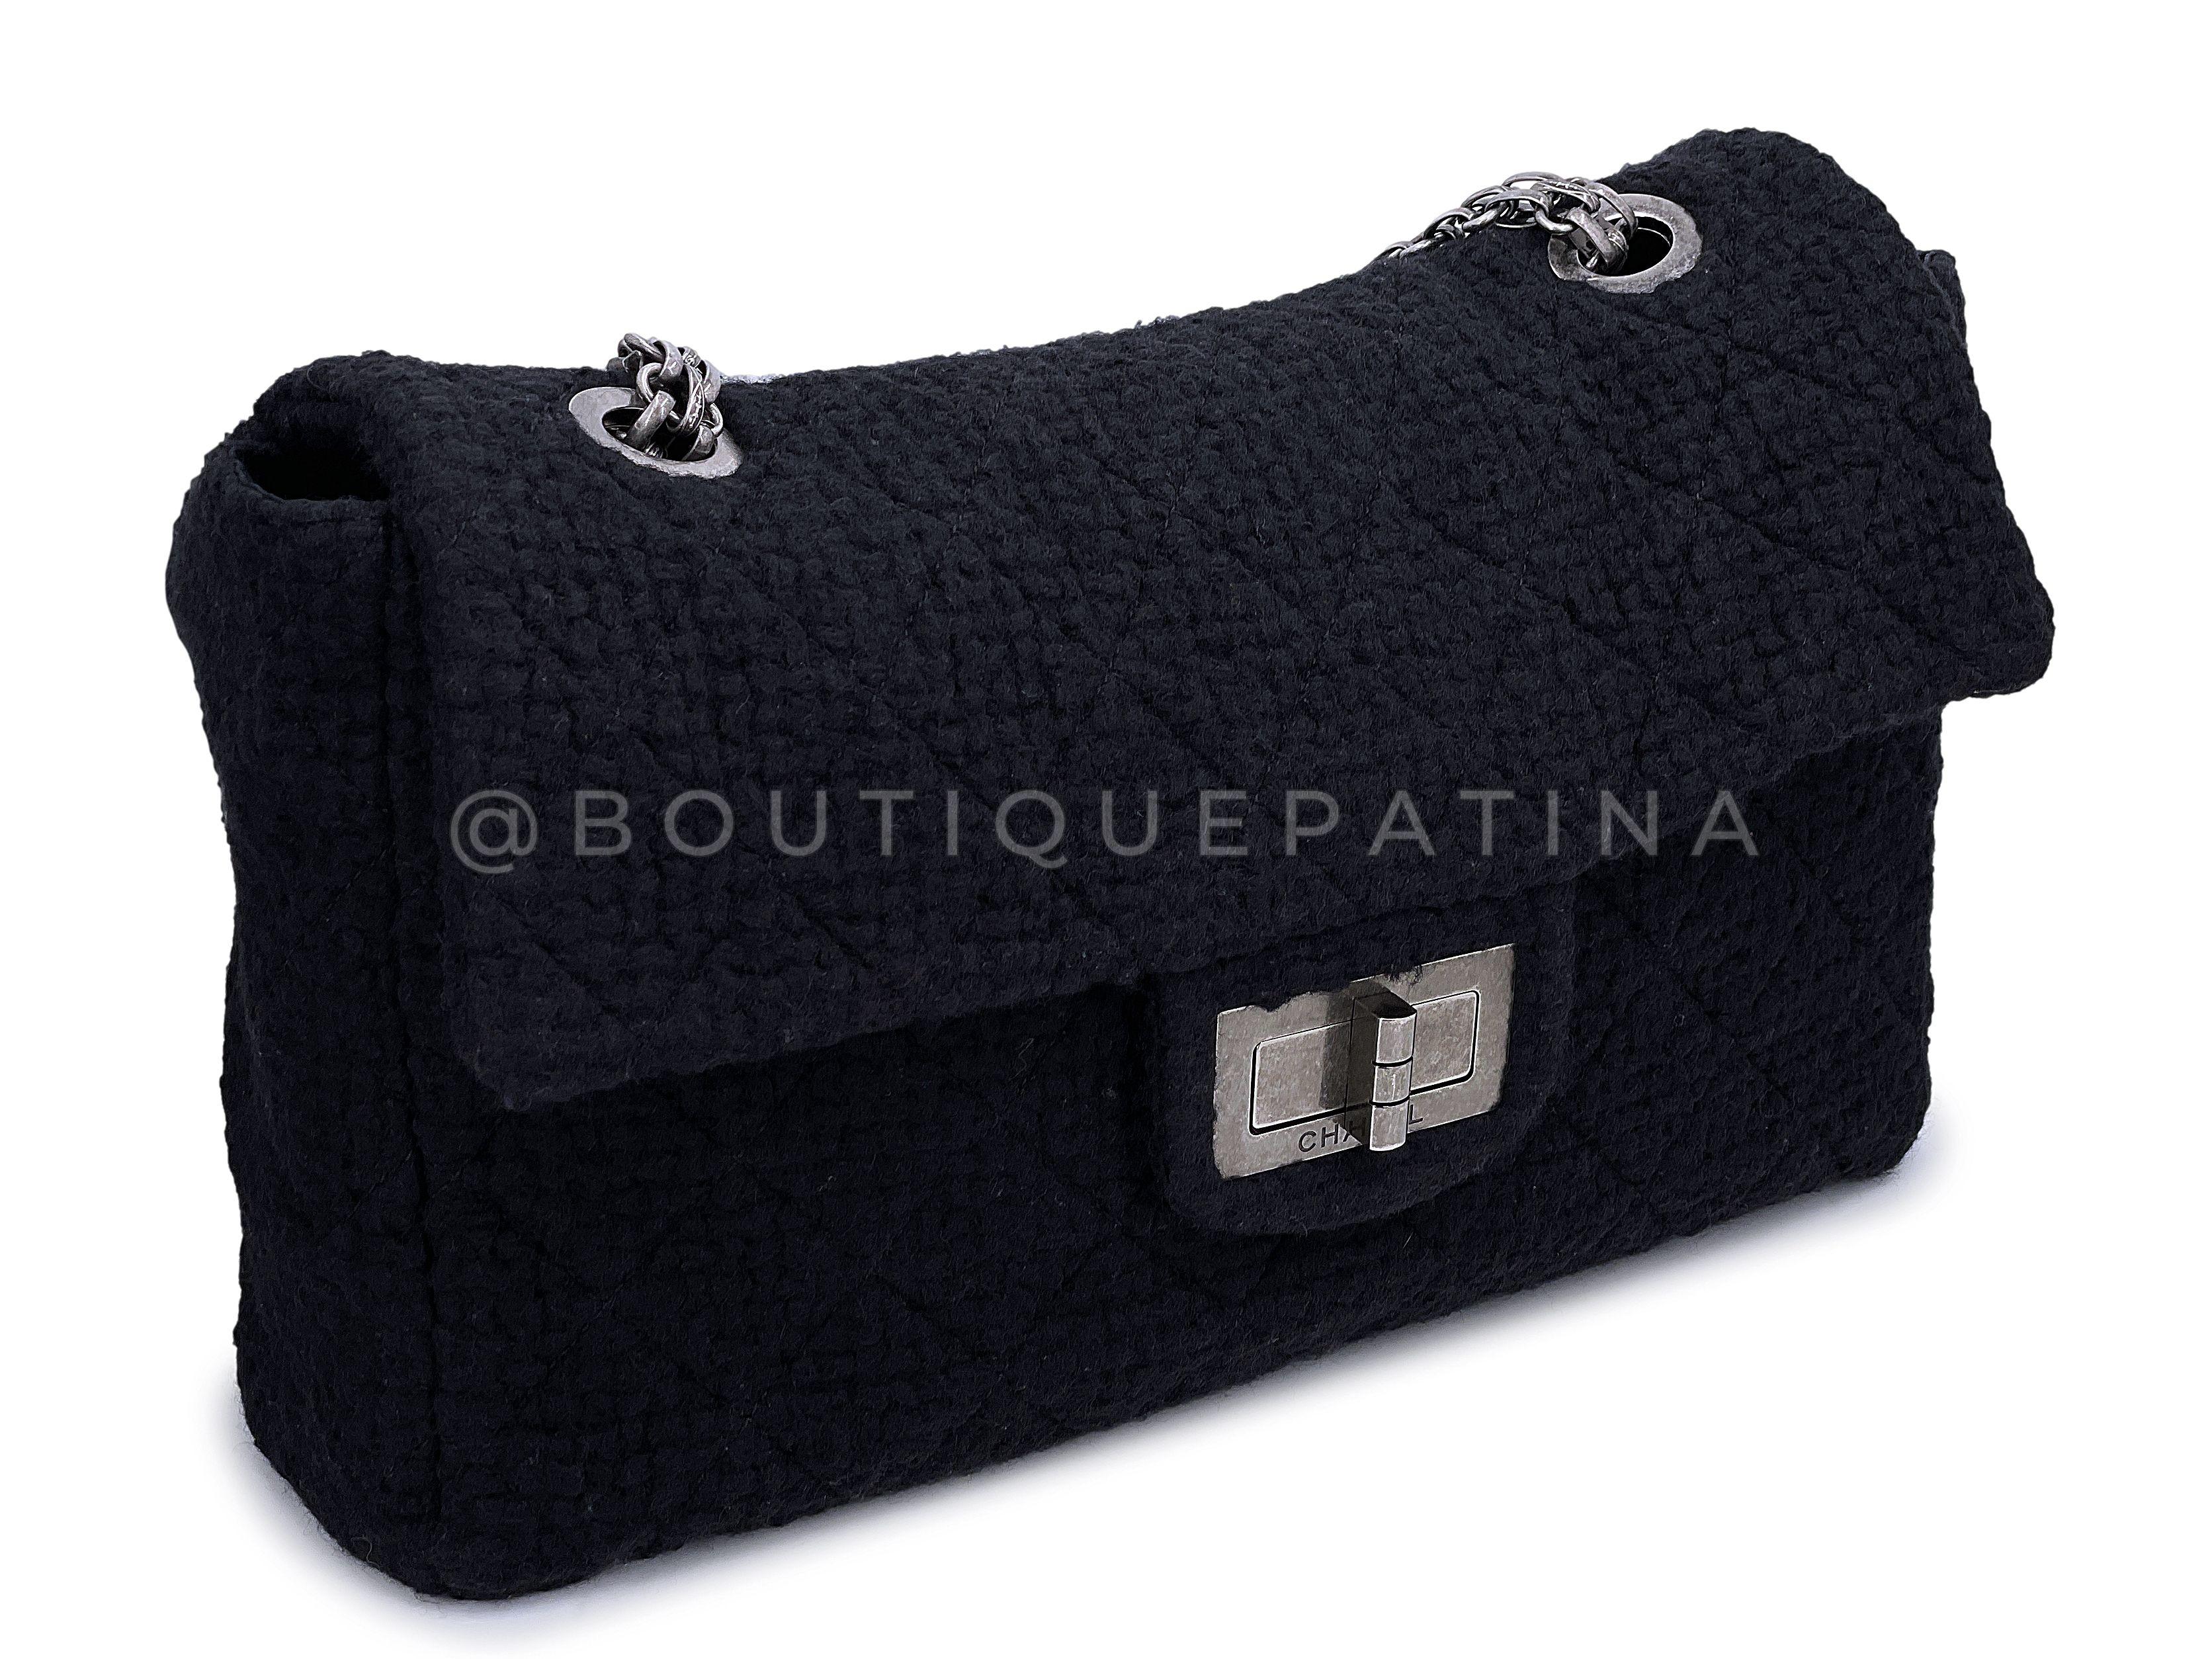 Rare 2009 Chanel Black Tweed XXL Supermodel Reissue Flap Bag Weekender RHW 67972 In Excellent Condition For Sale In Costa Mesa, CA